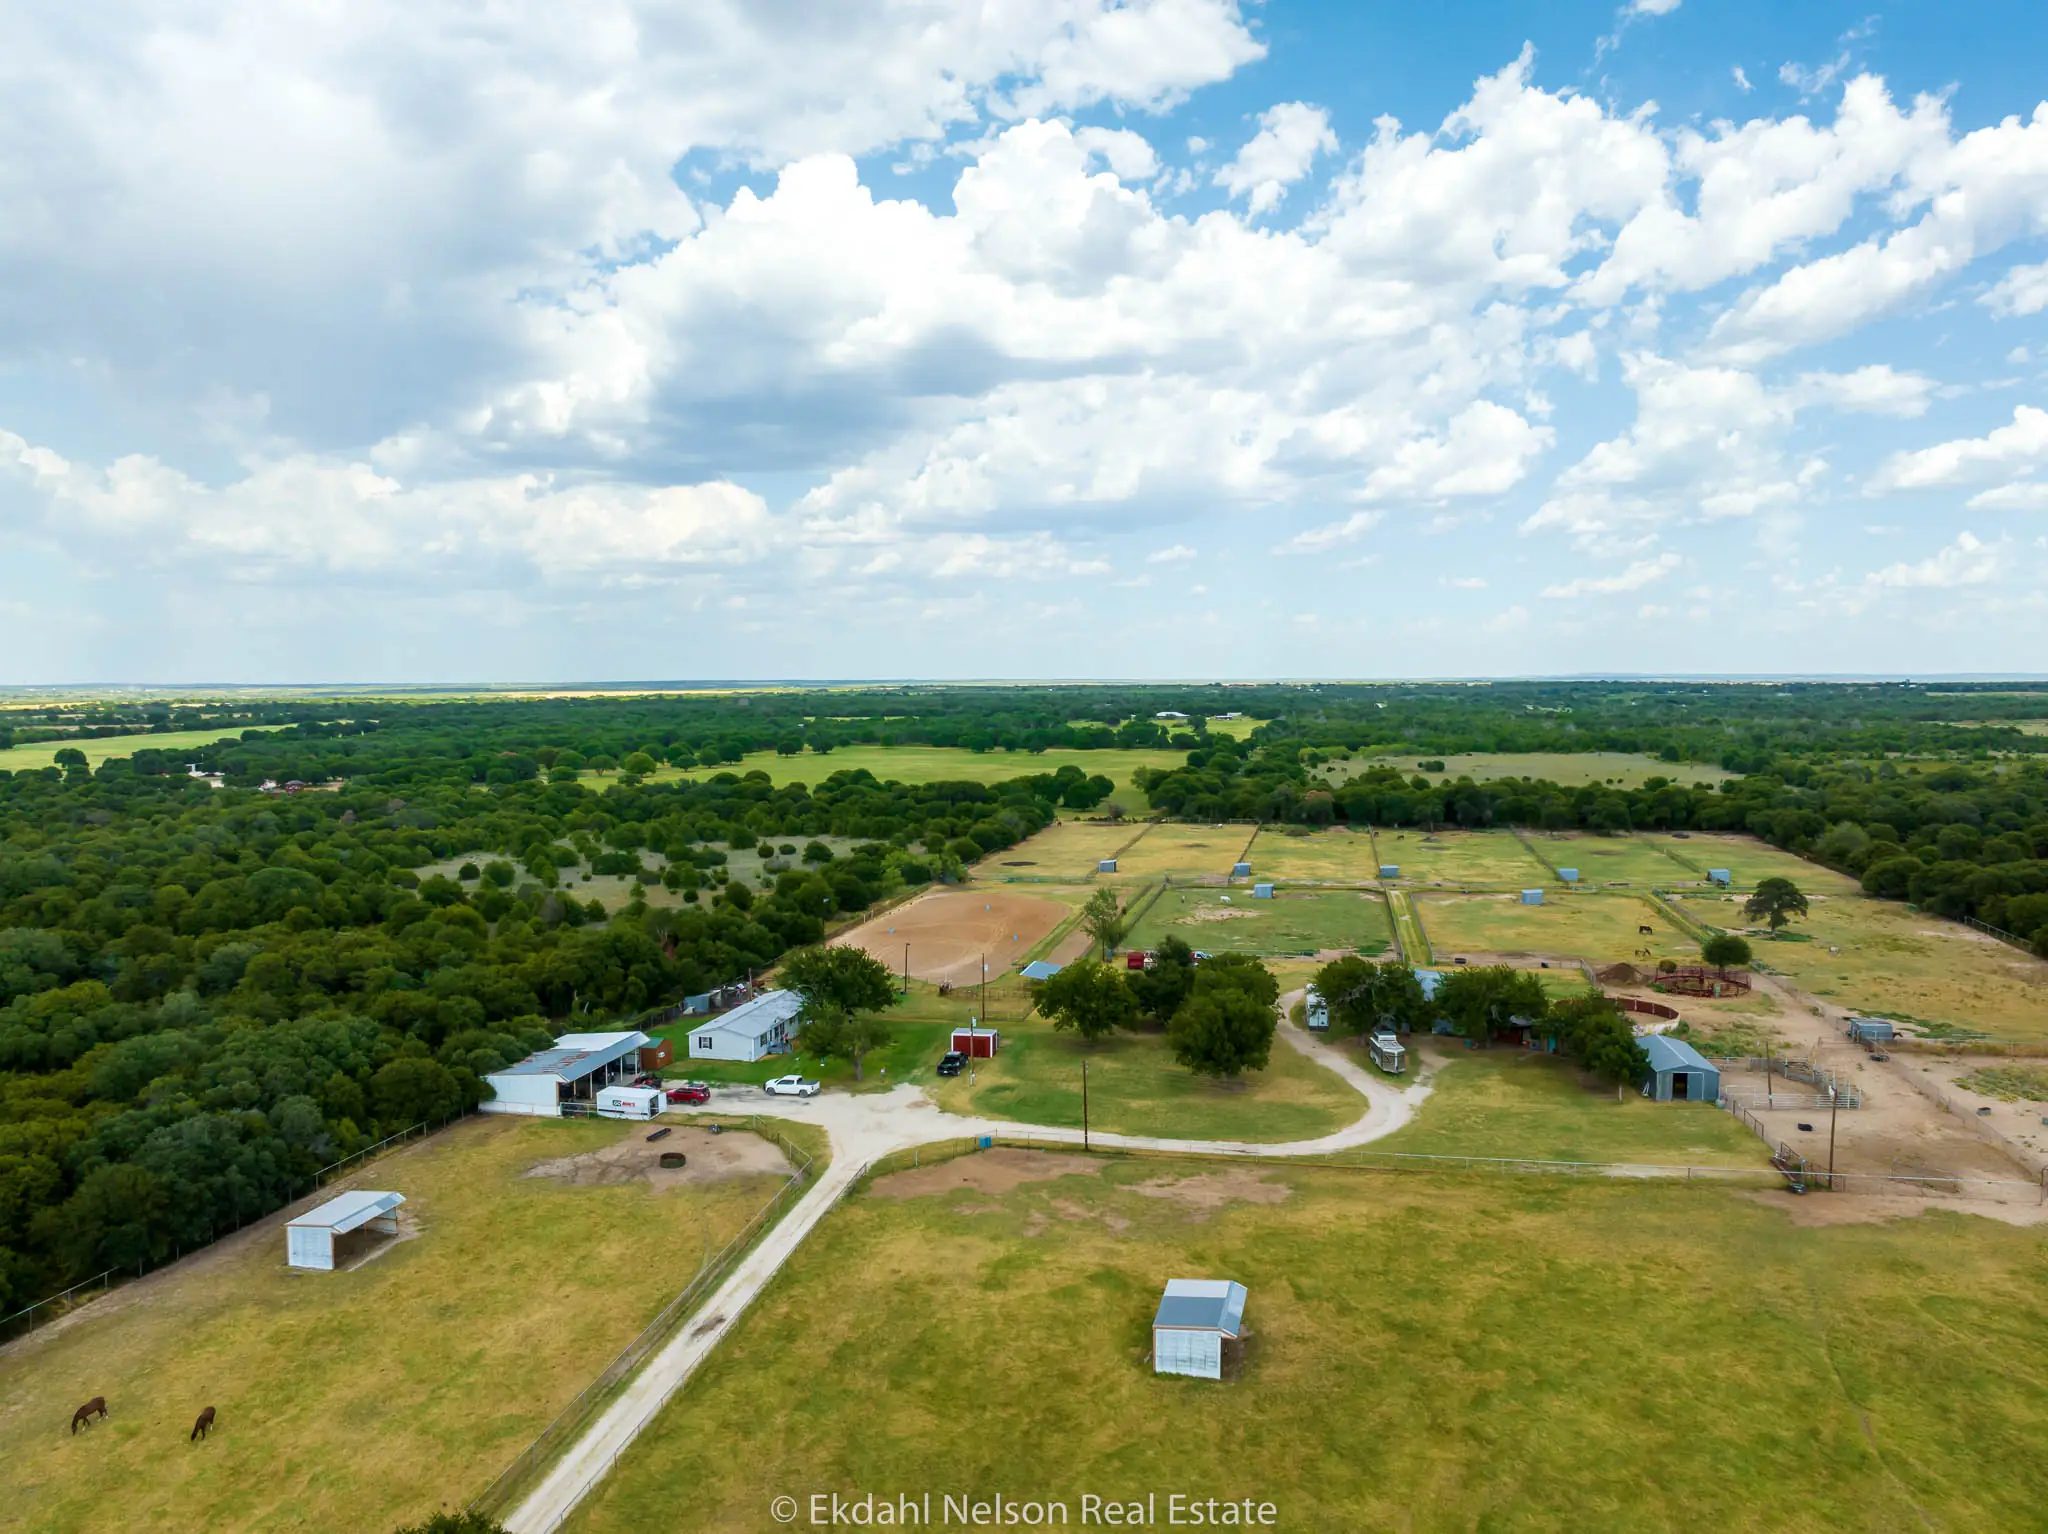 Aerial image of a ranch to convey Ranches for Sale in Anson - Ekdahl Nelson Real Estate